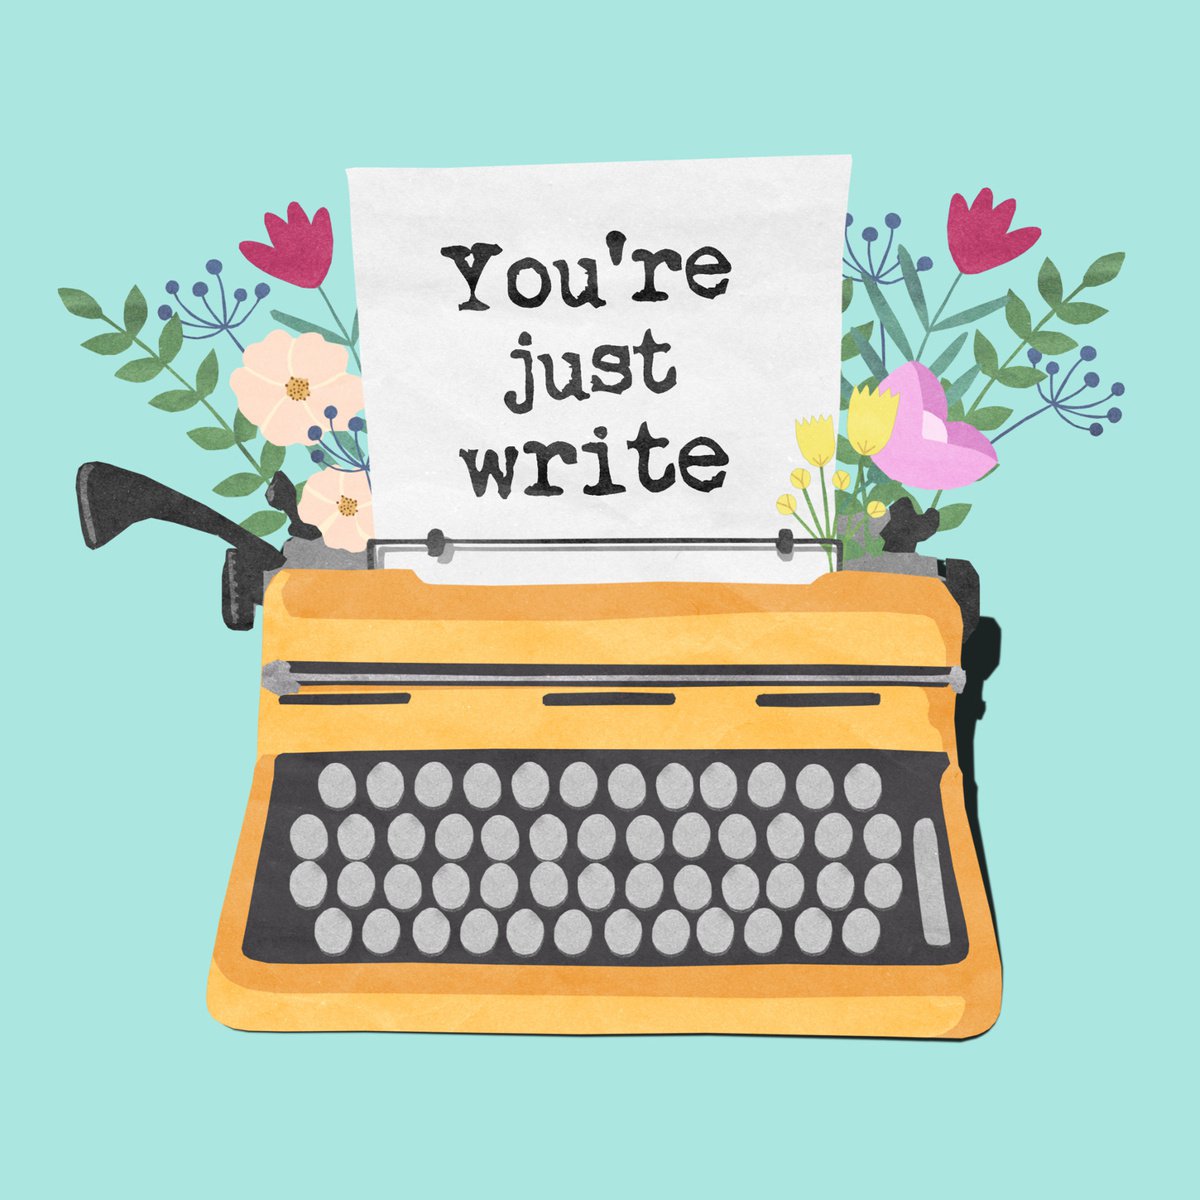 You’re Just Write by Peter Walters